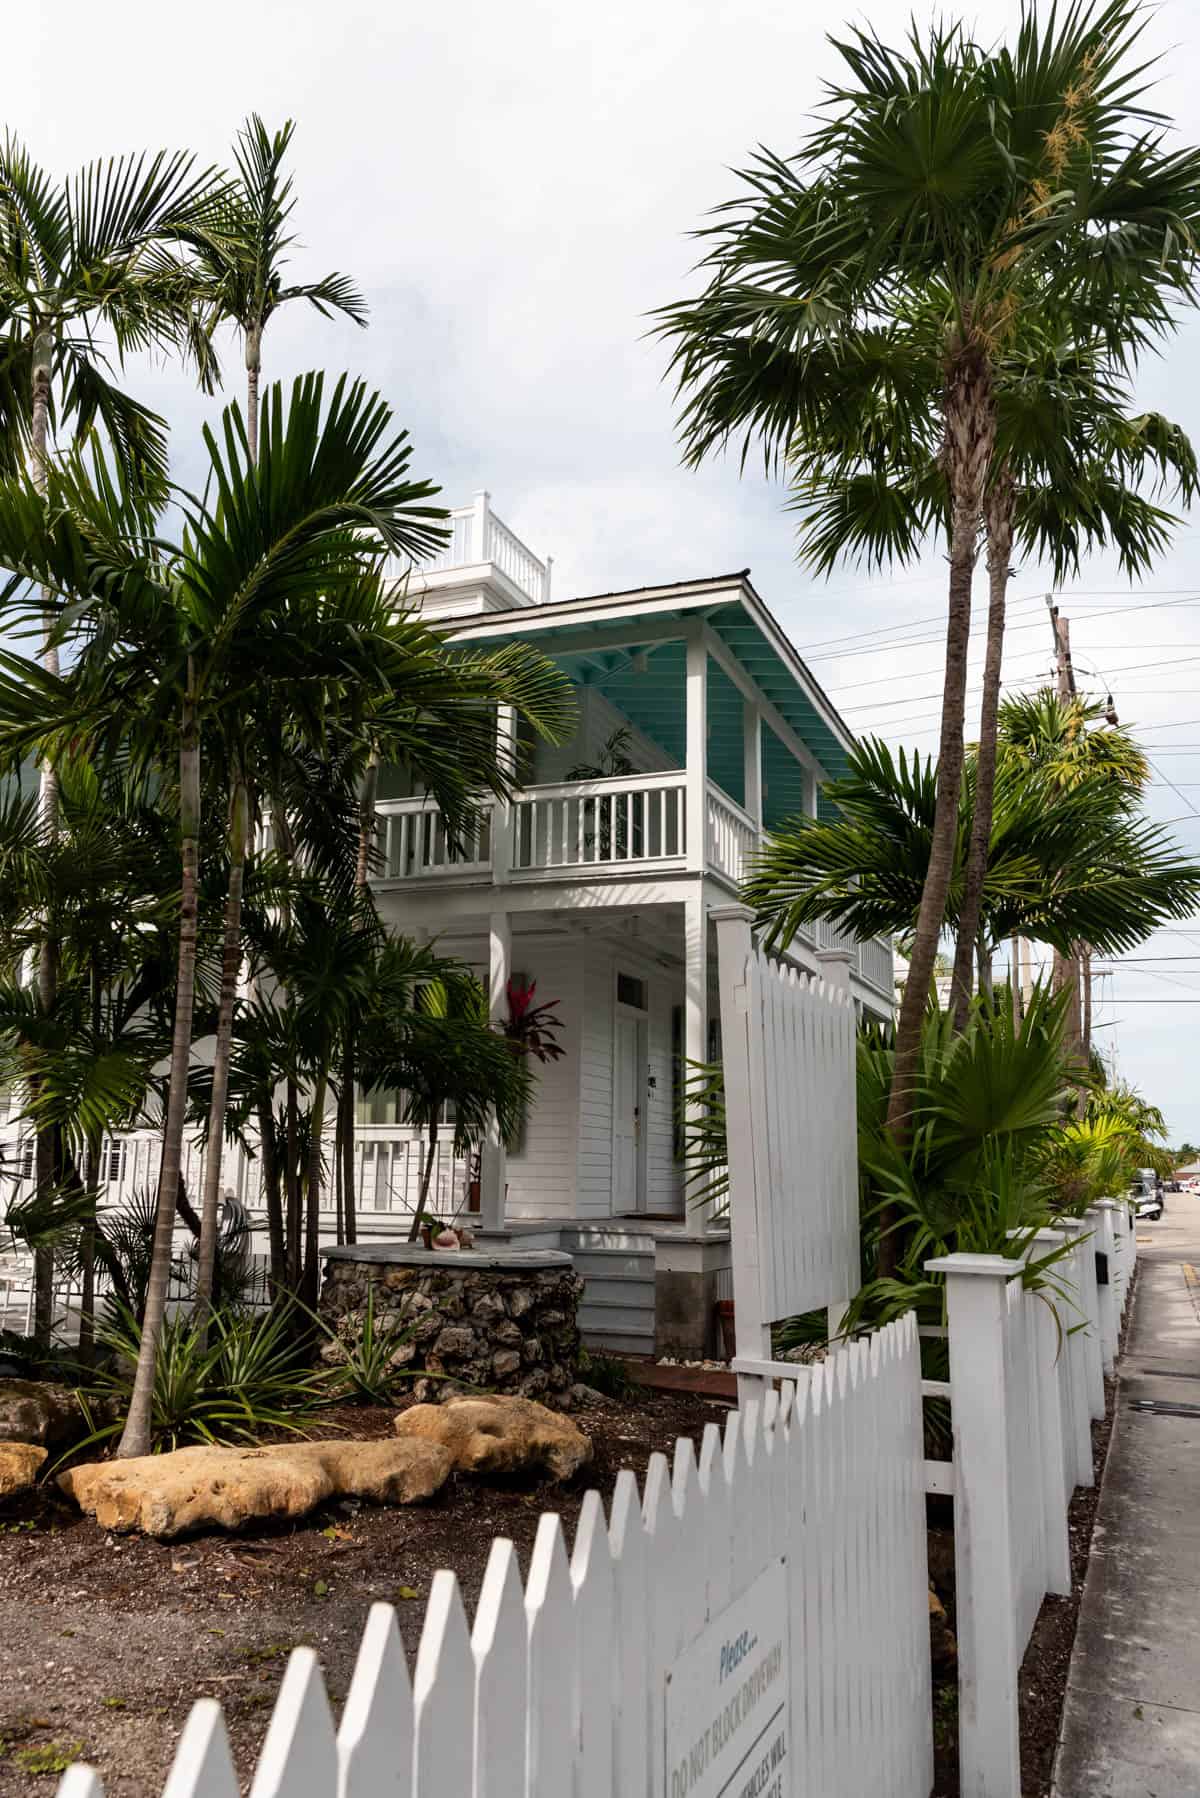 A house in the Florida Keys.